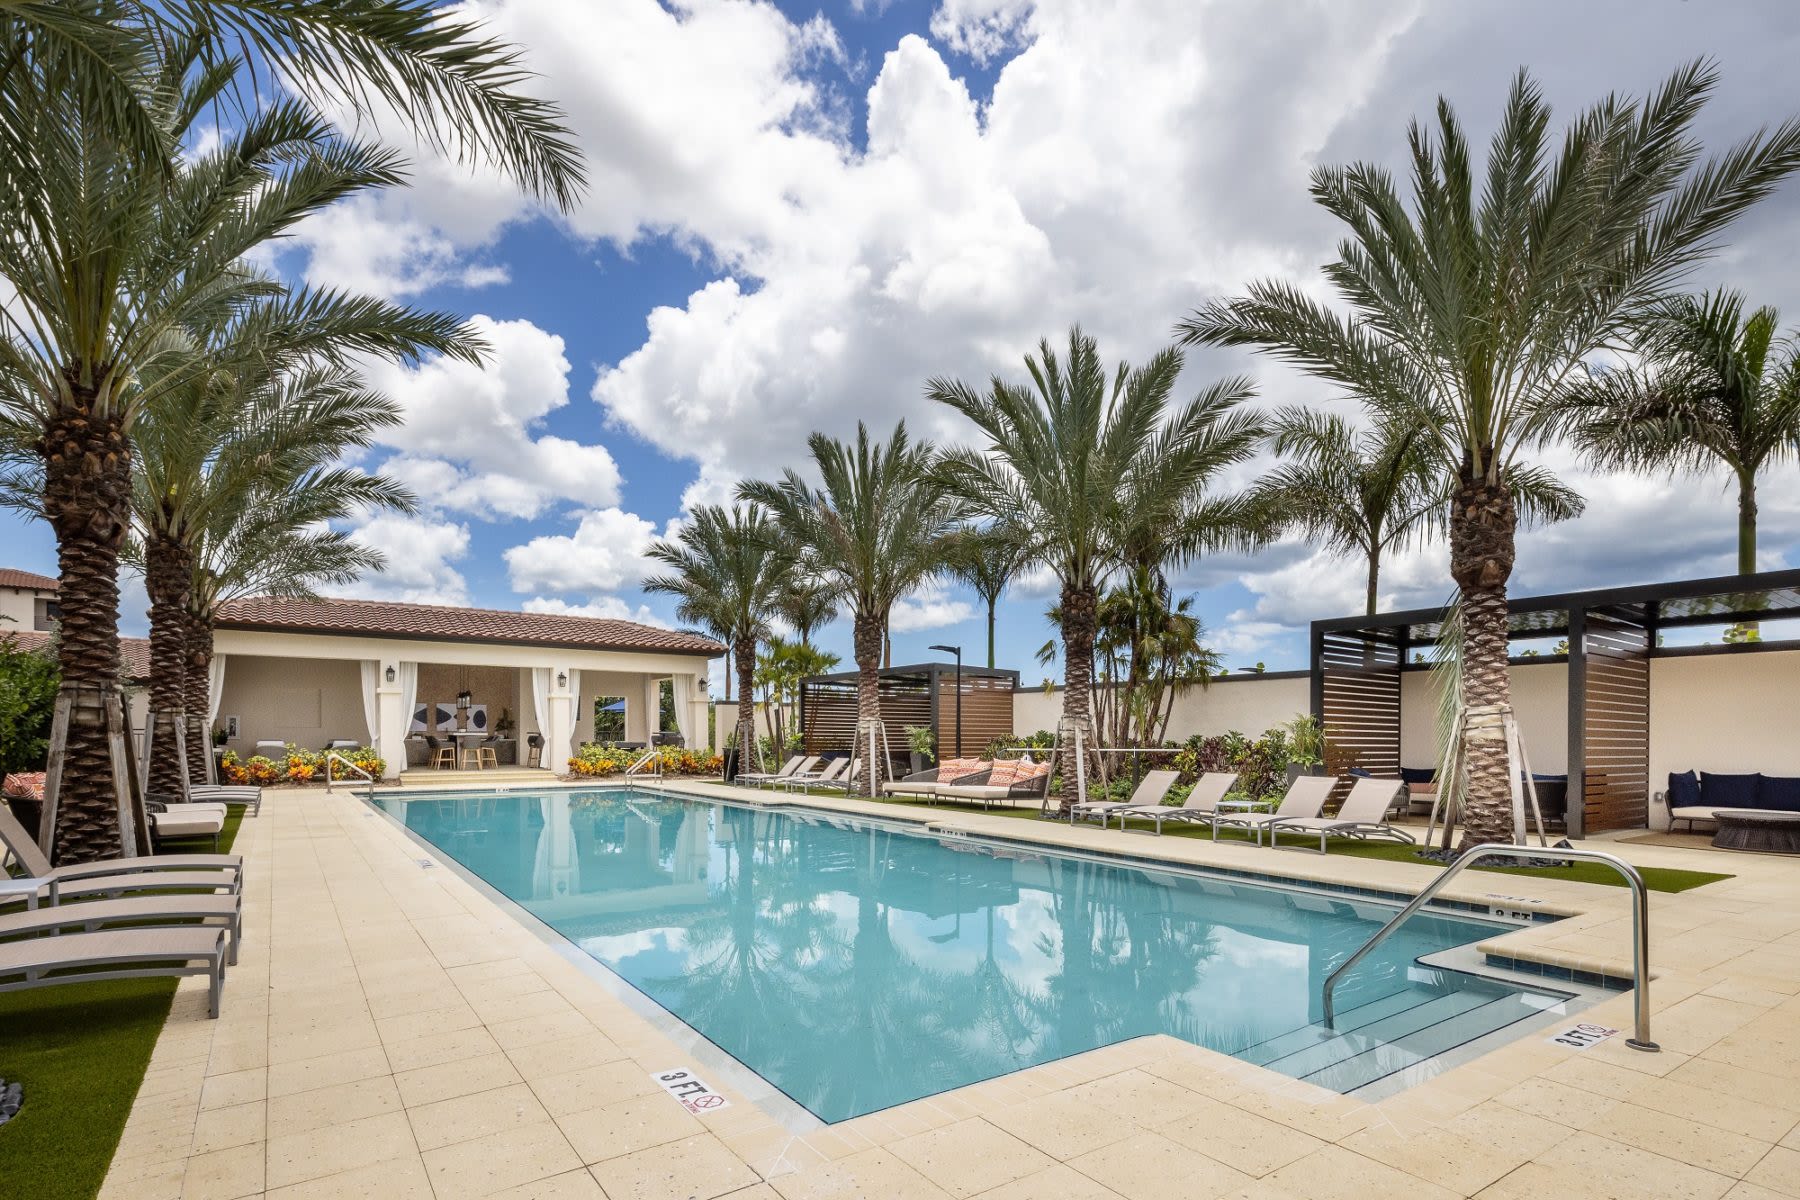 Serene pool with palm trees, loungers, clubhouse at Locklyn West Palm, West Palm Beach, Florida